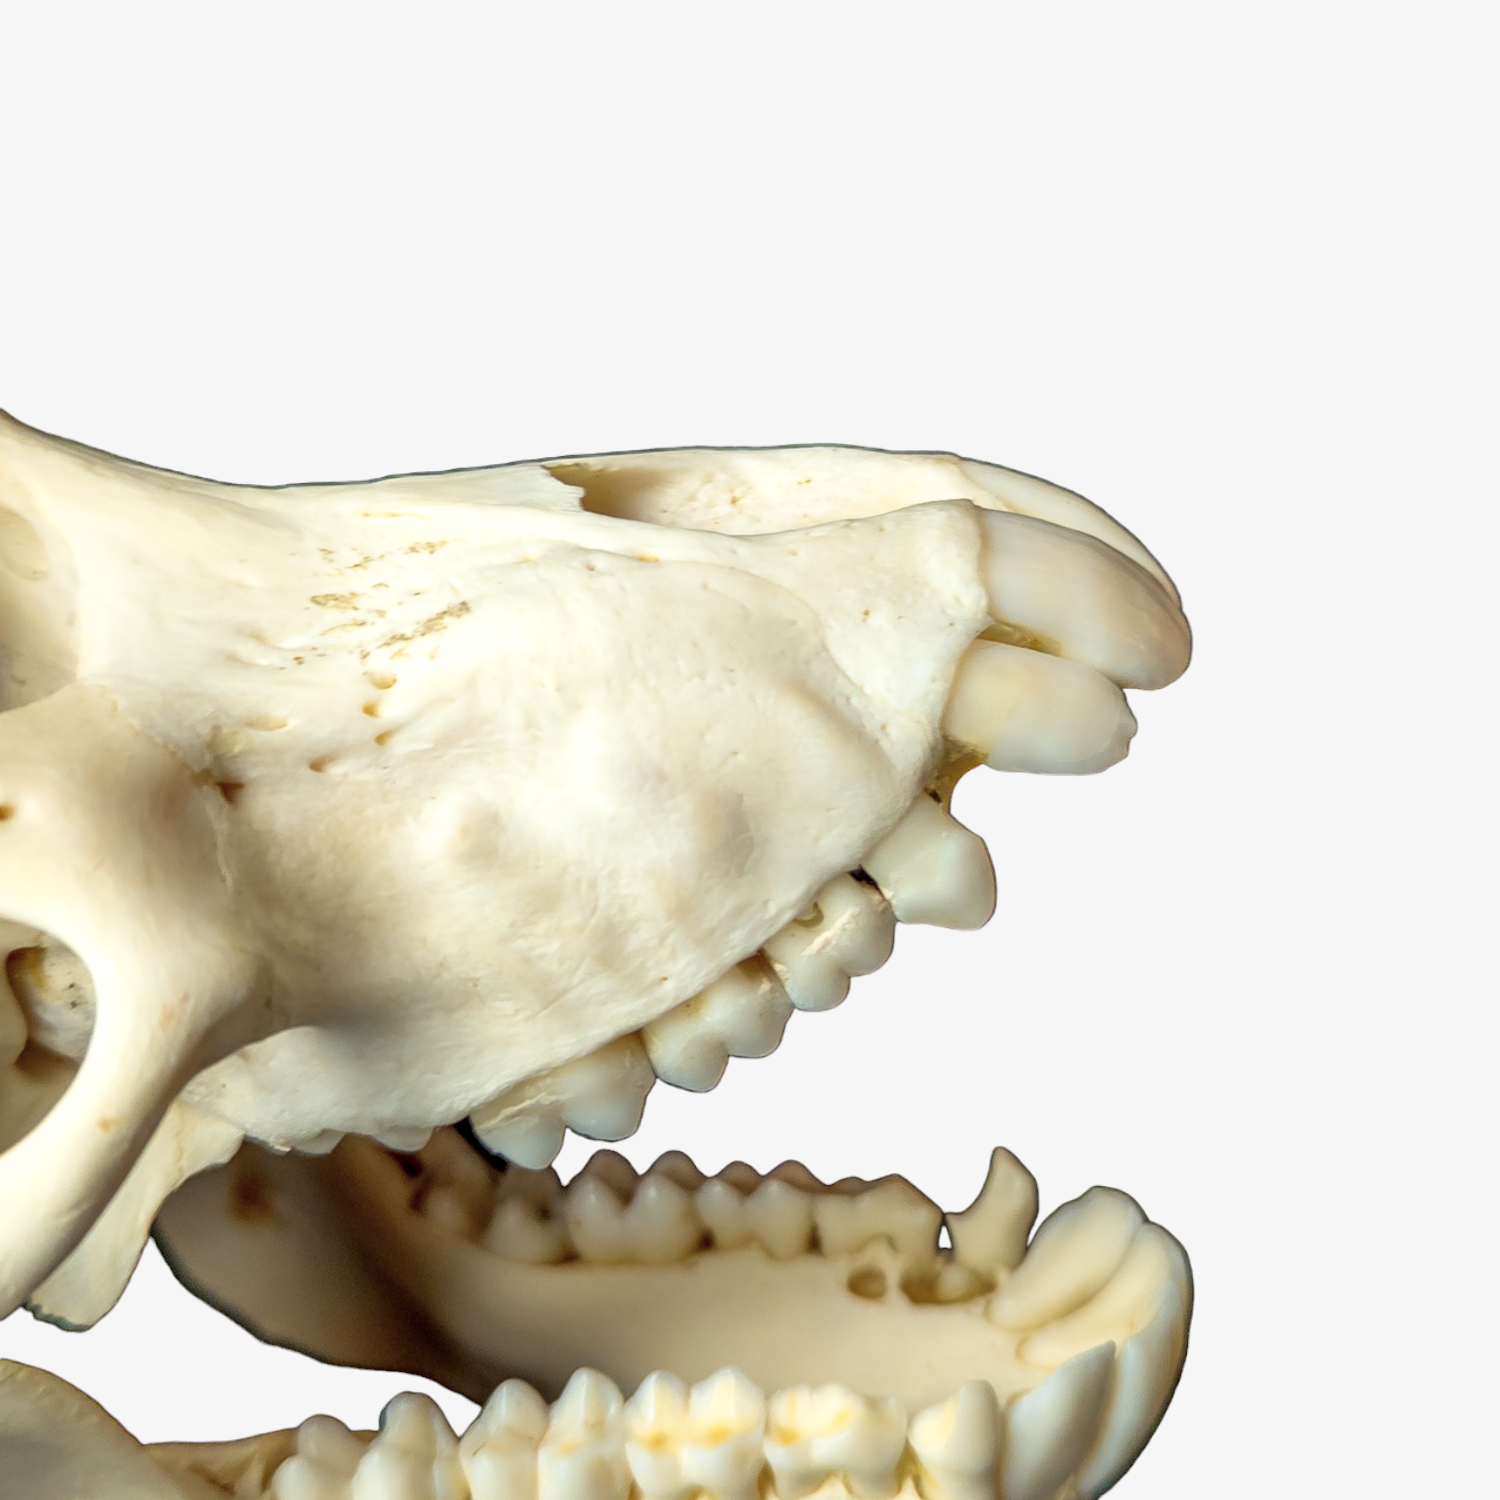 Adult Female Chacma Baboon Skull (Discounted)